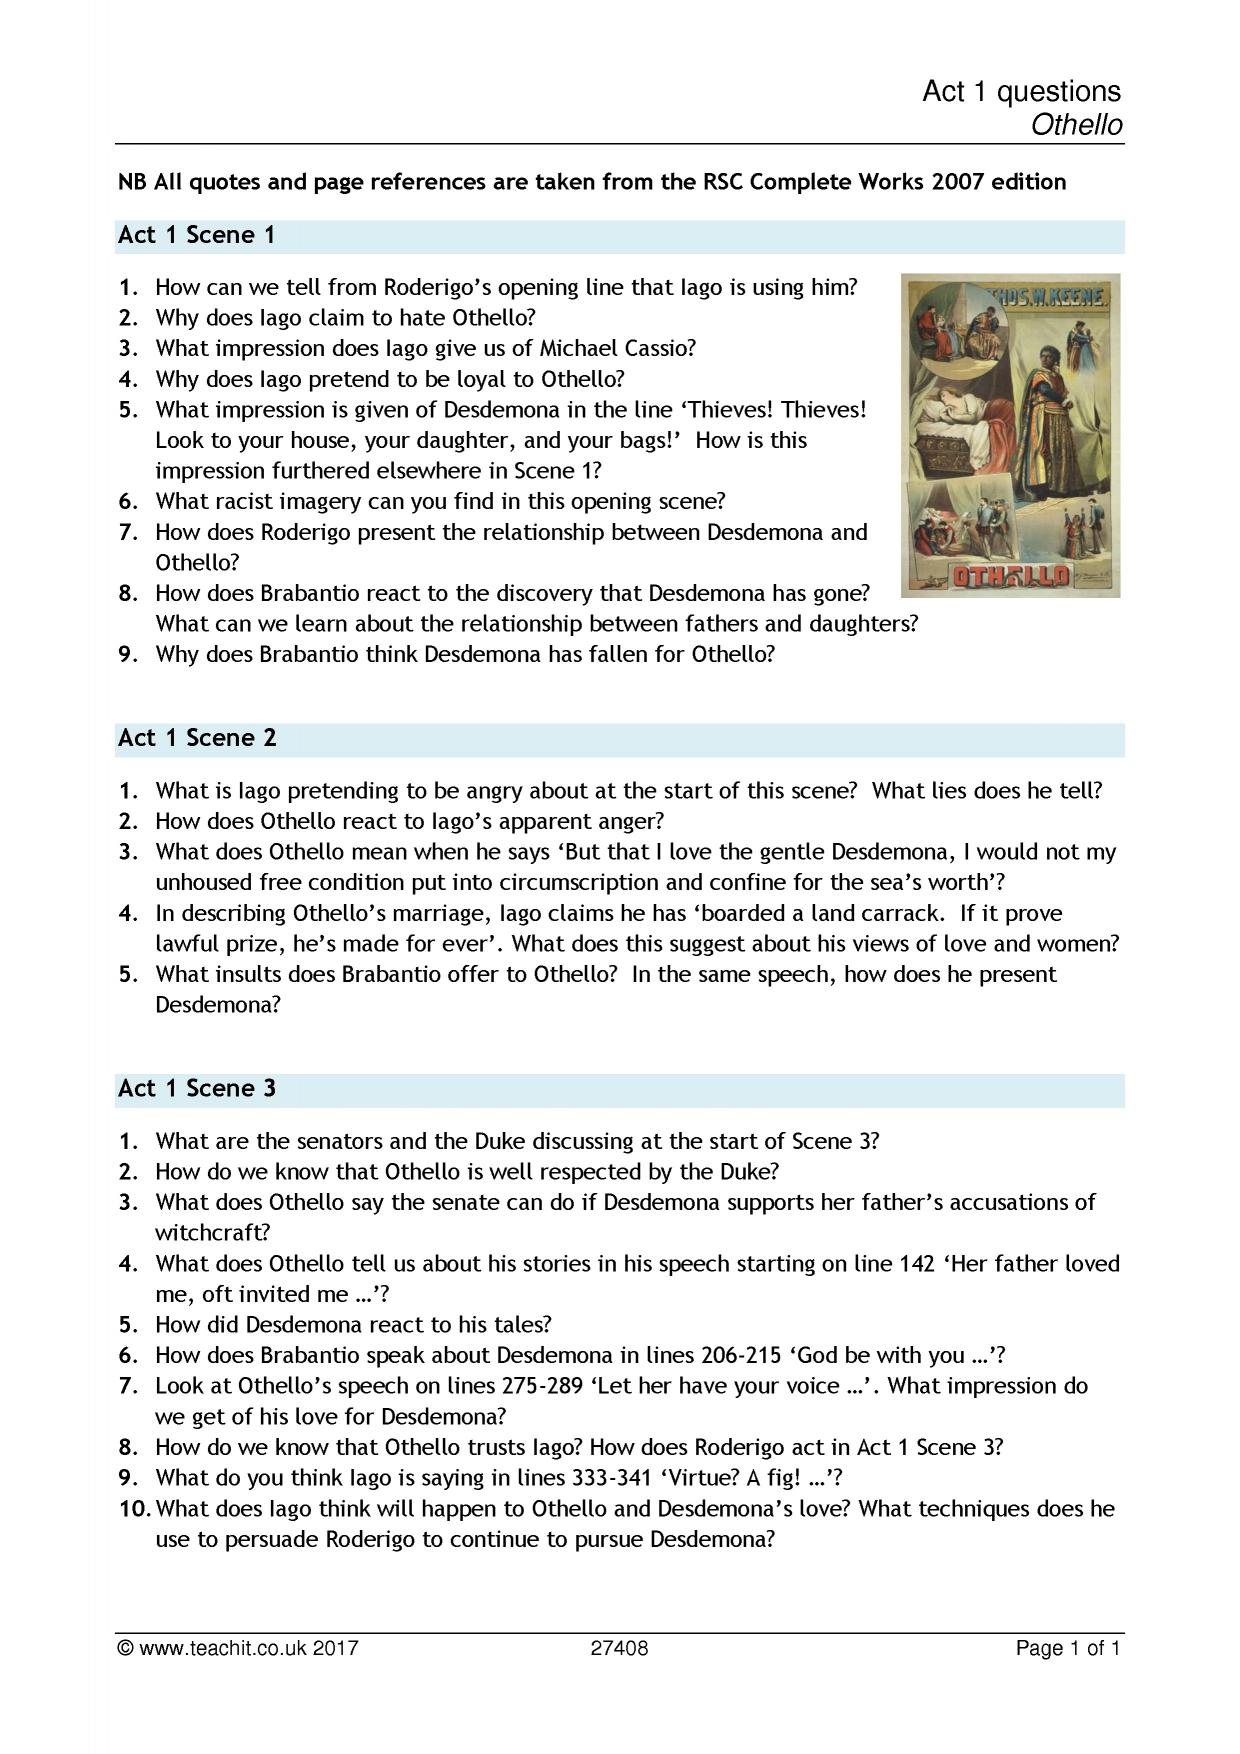 essay questions on othello act 1